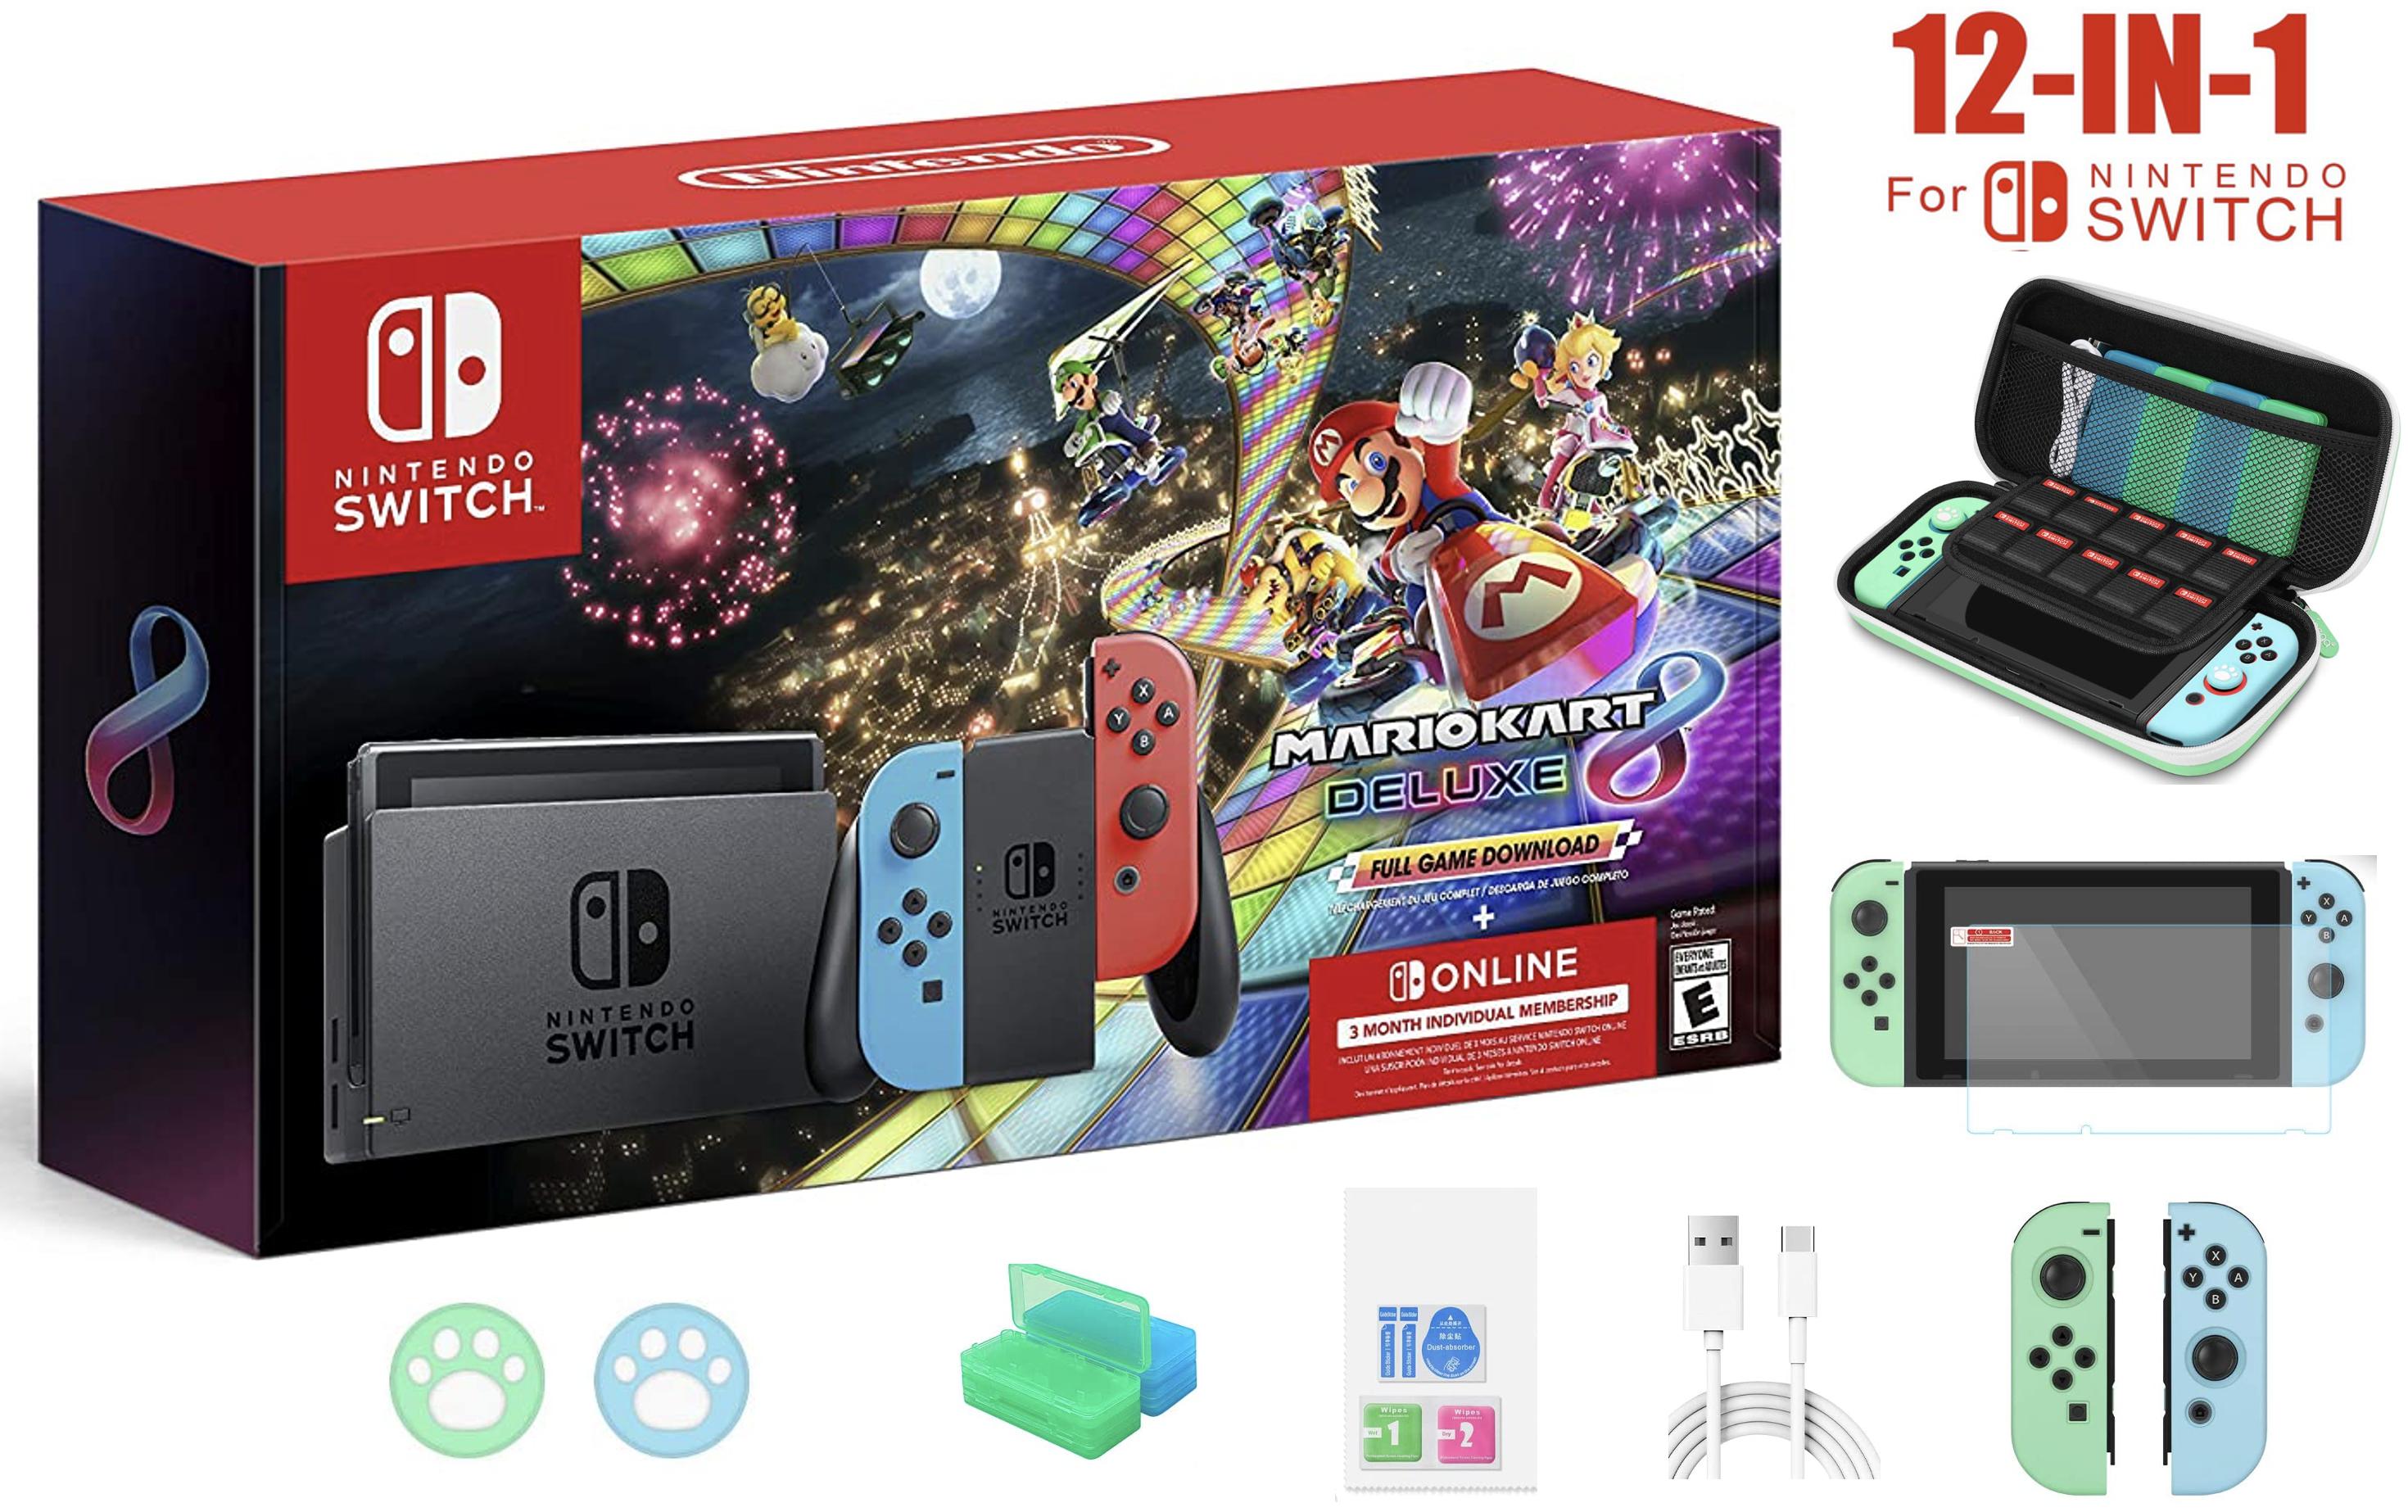 2022 Nintendo Switch Console with Mario Kart 8 Deluxe - Neon Red/Blue Joy-Con, 6.2" Touchscreen LCD Display, Marxsol 12-in-1 Accessories - image 1 of 9